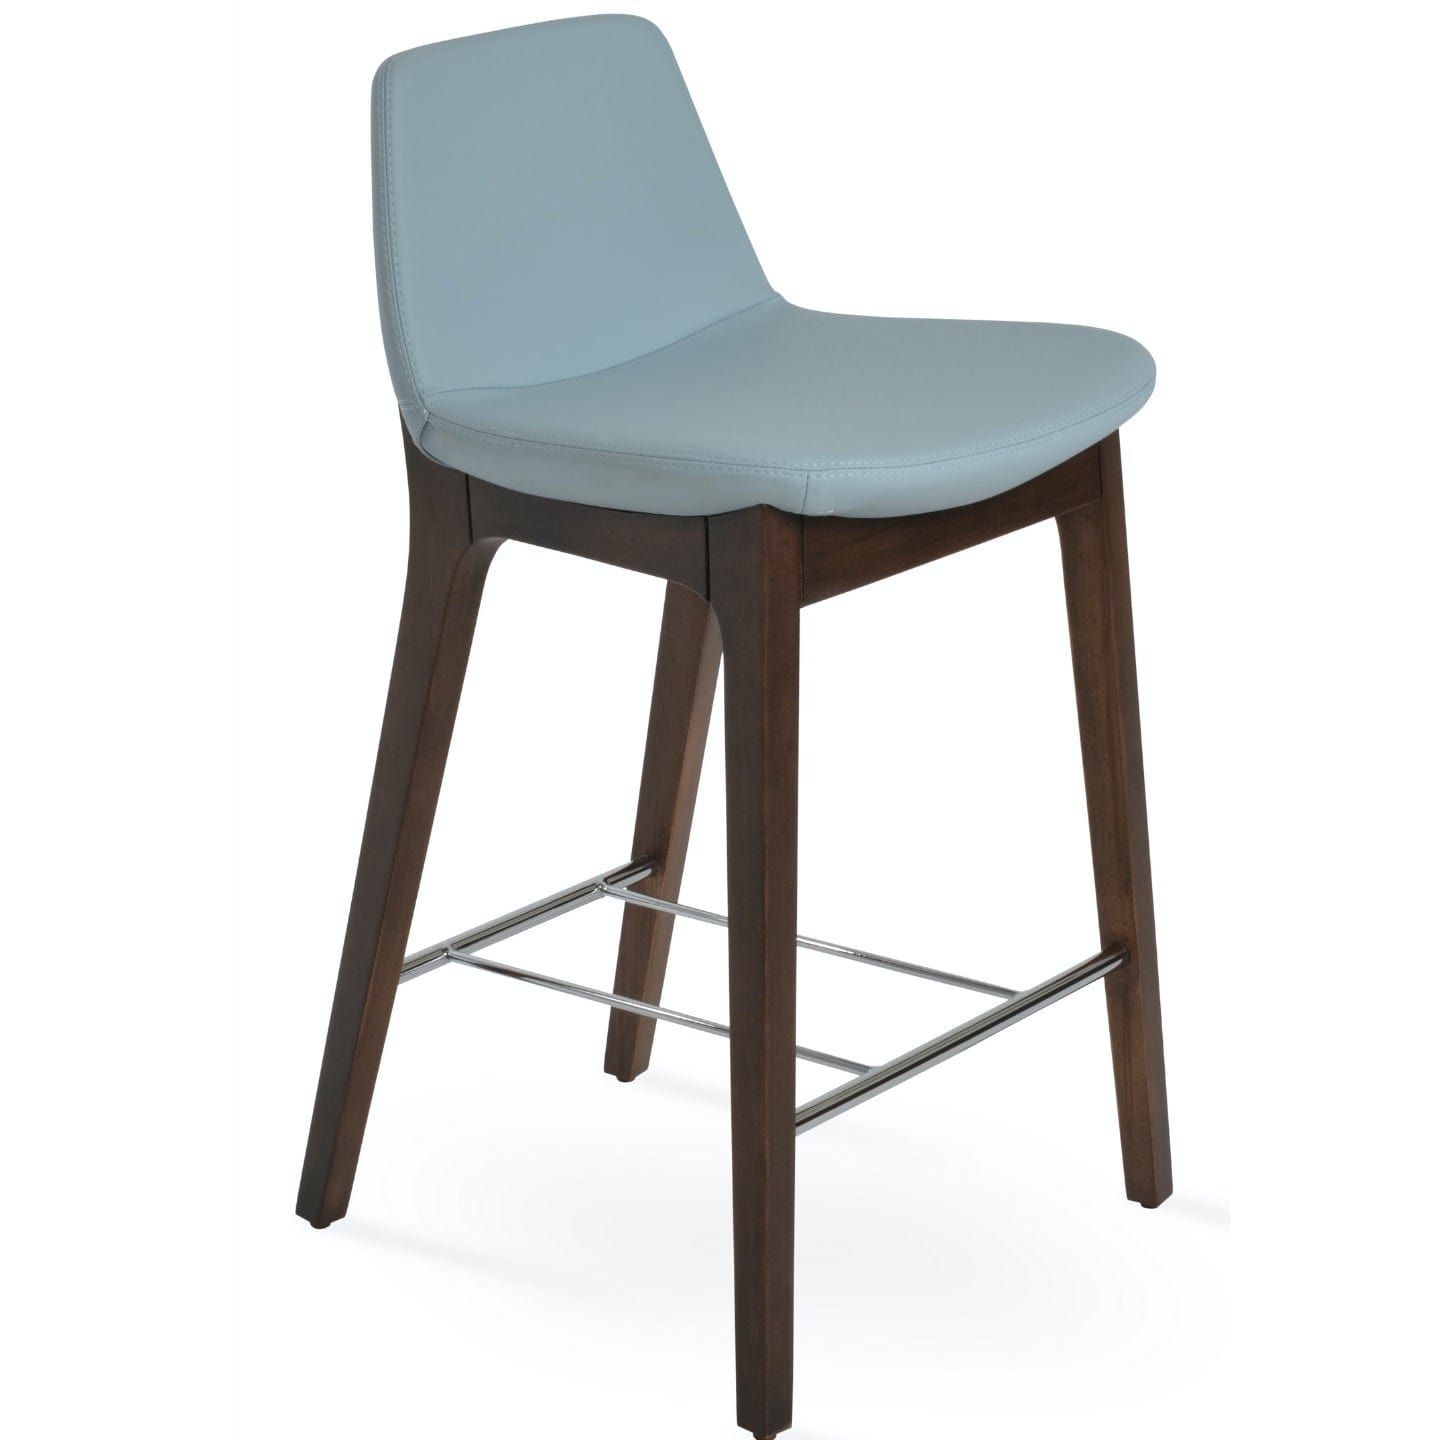 Soho Concept pera-wood-handle-back-wood-base-faux-leather-seat-kitchen-counter-stool-in-sky-blue